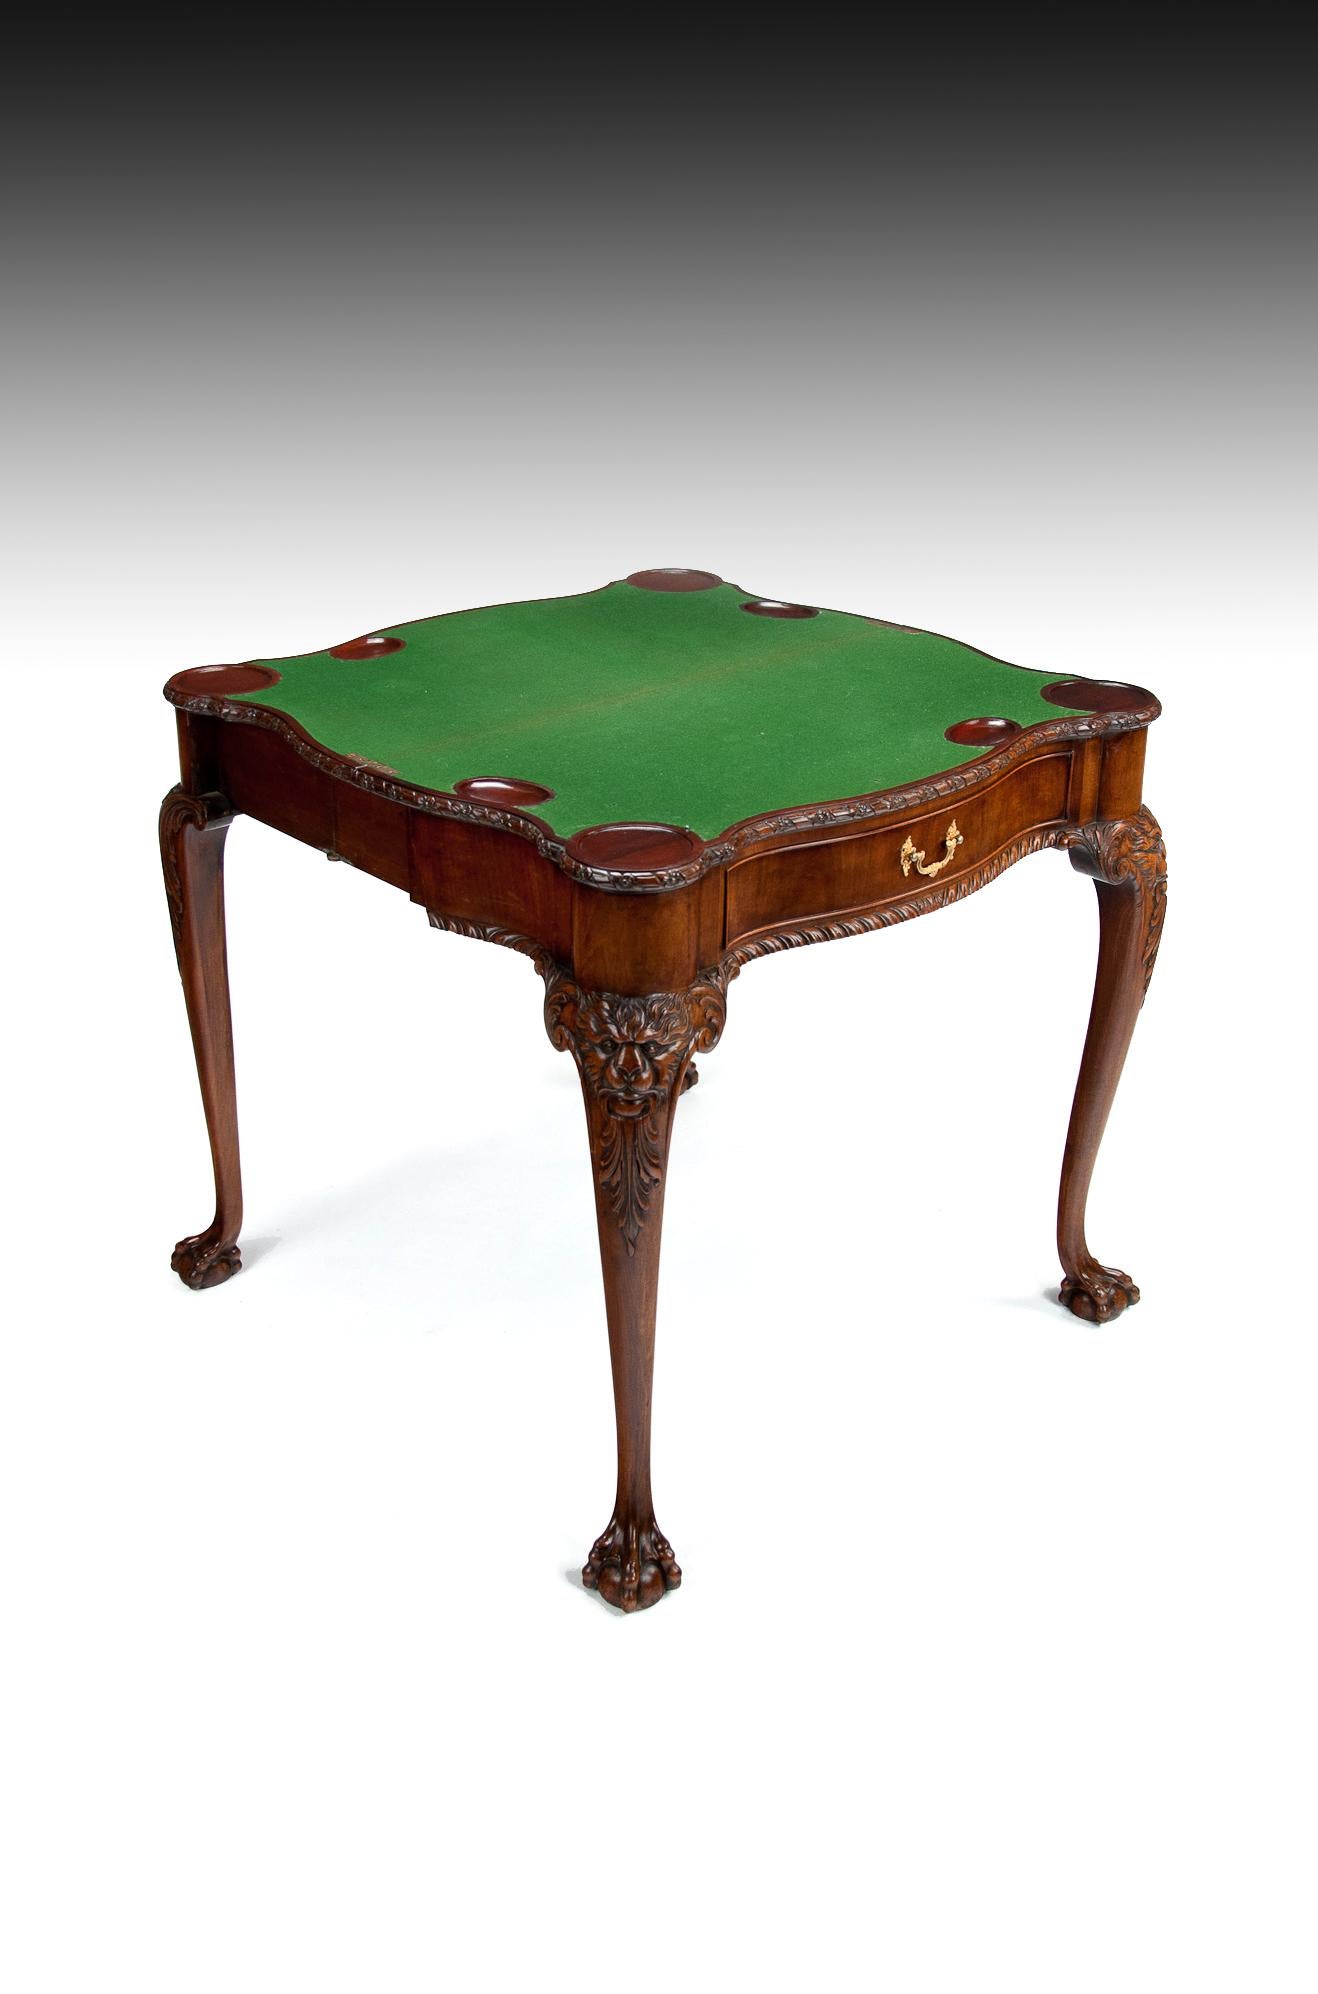 George II Howard and Sons Mahogany Card Table with Concertina Action Irish Georgian Style